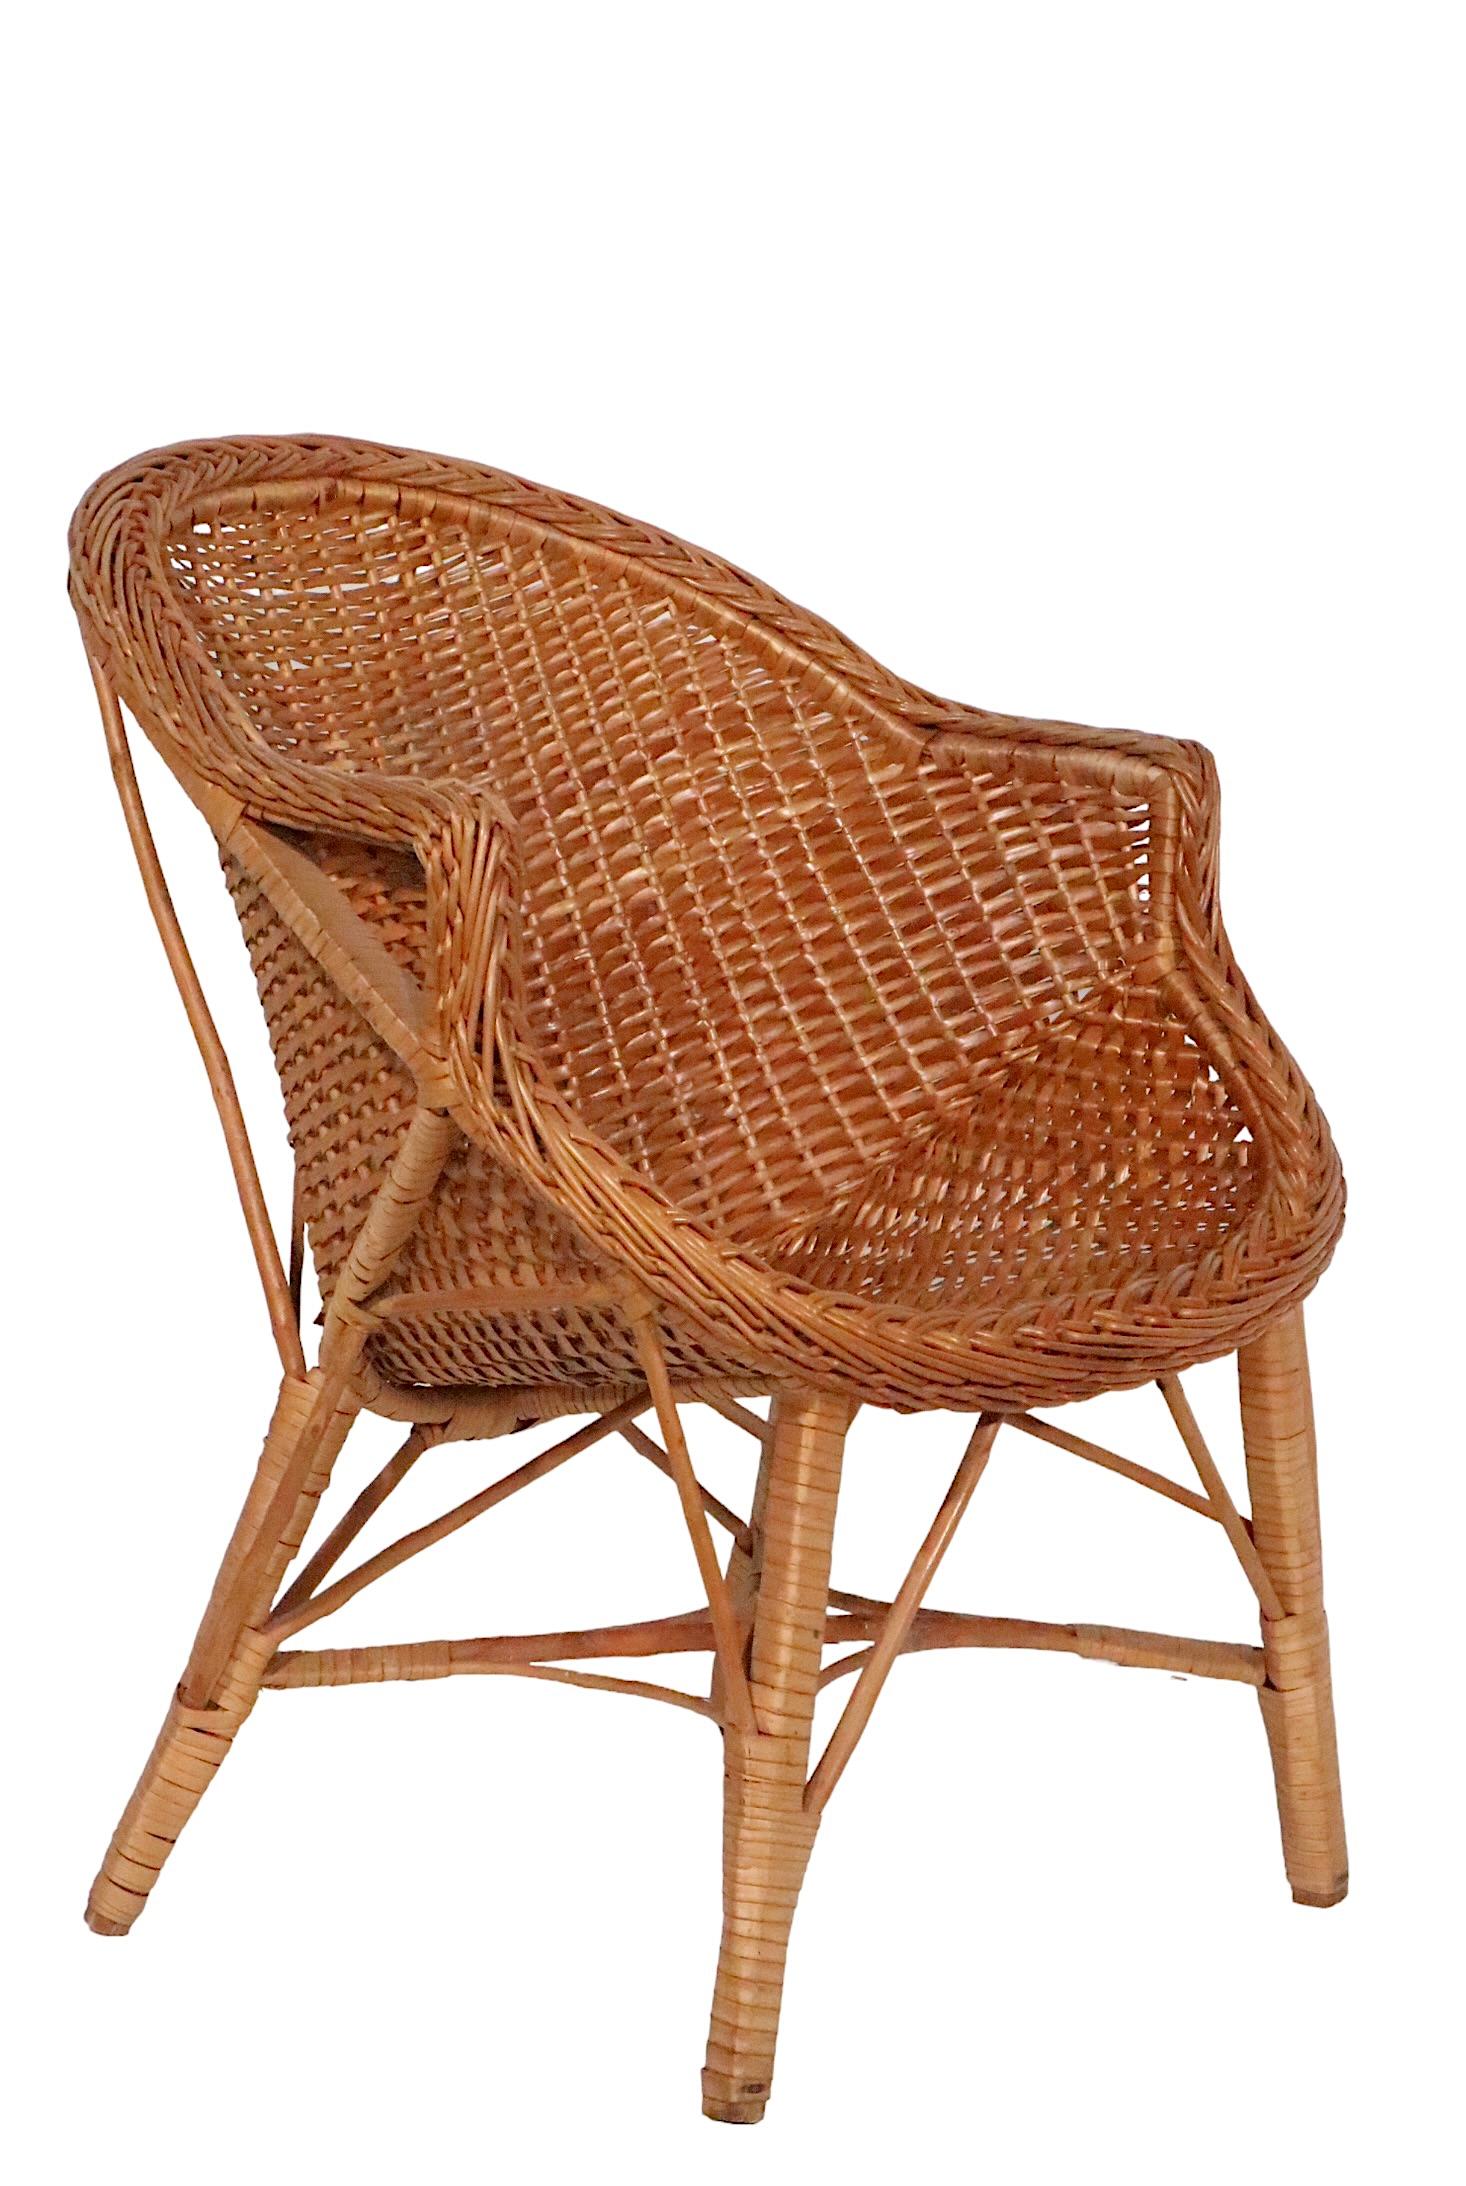 Pr  Mid Century Woven Wicker Arm Chairs  For Sale 5